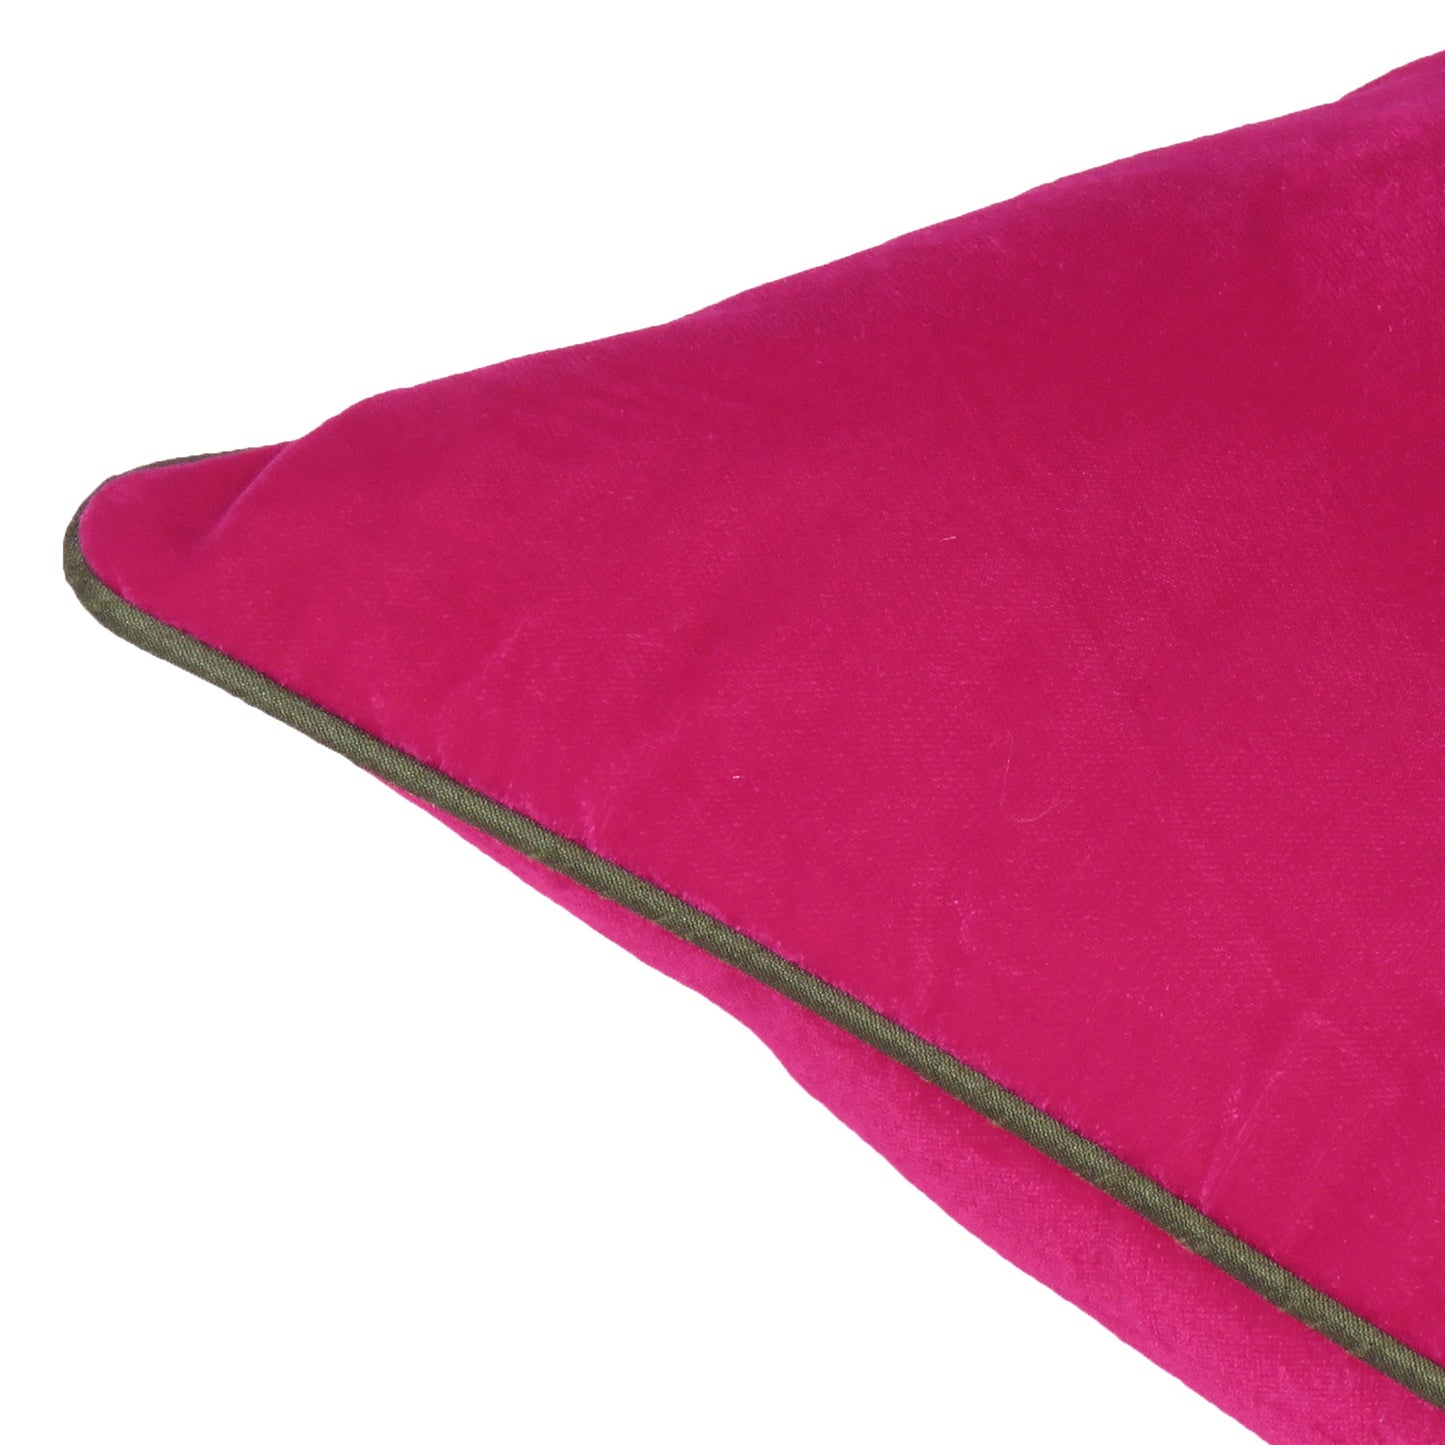 Pink Velvet Cushion Cover with Green Piping Edge in Set of 2